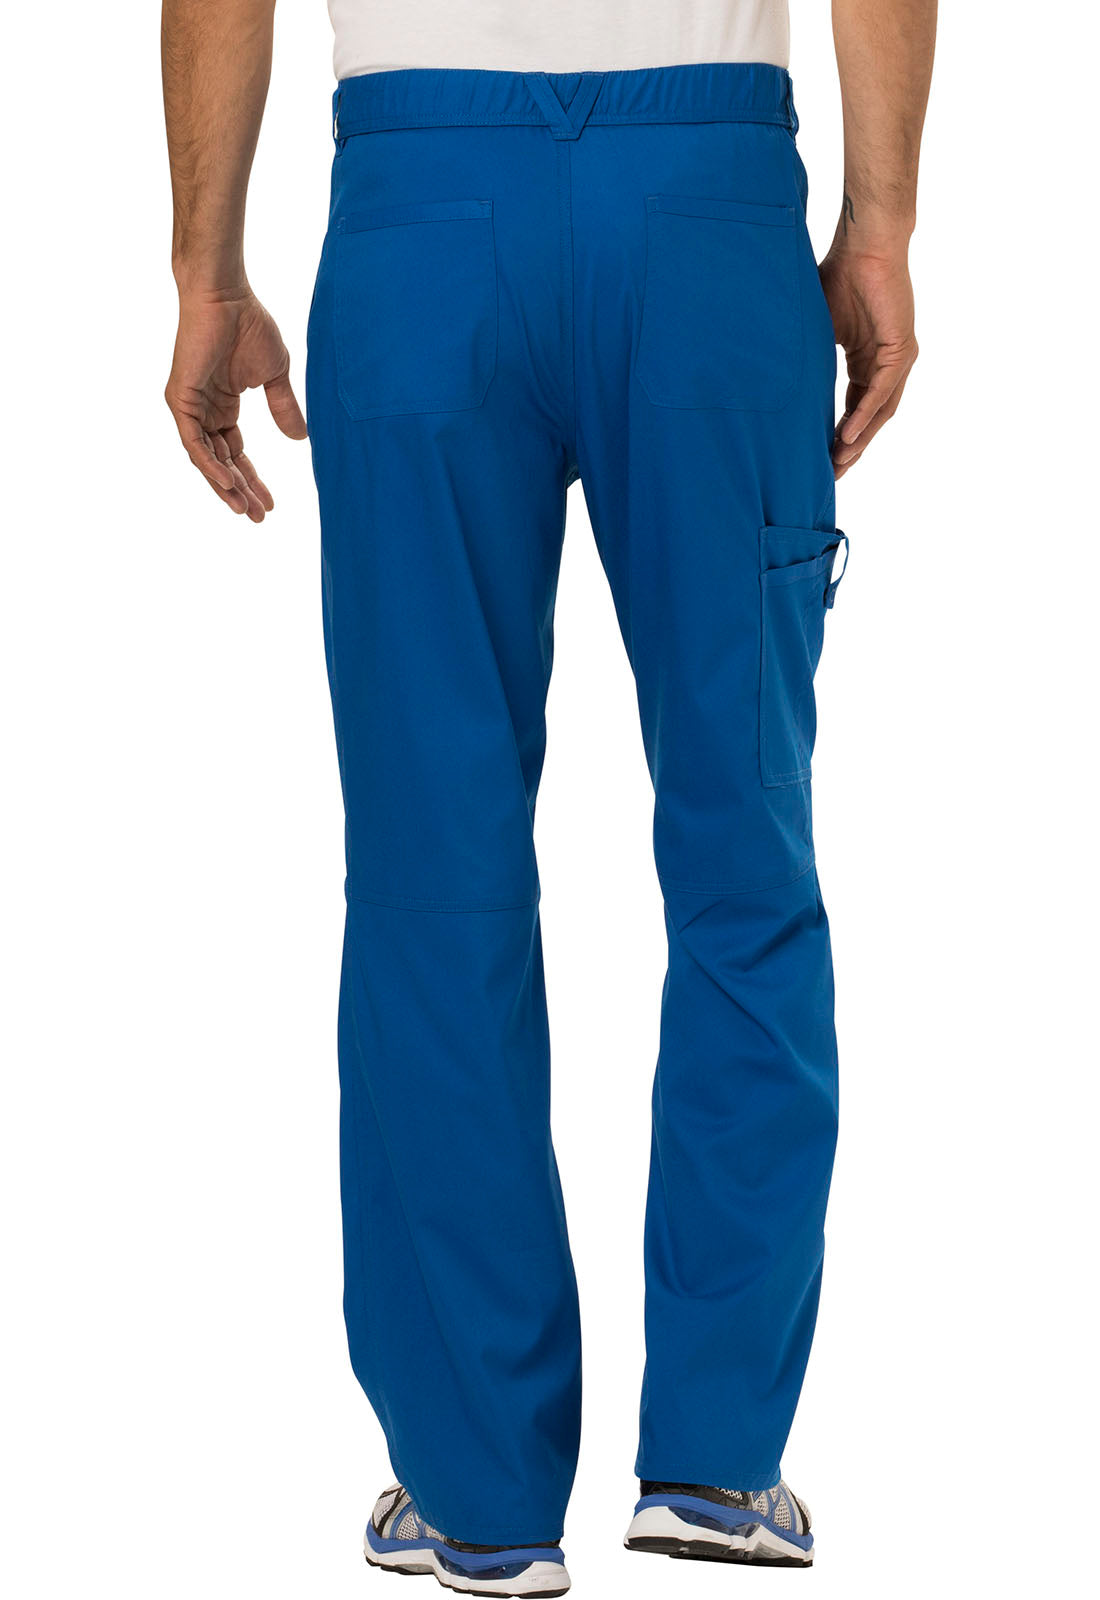 WW140 - Men's Fly Front Pant